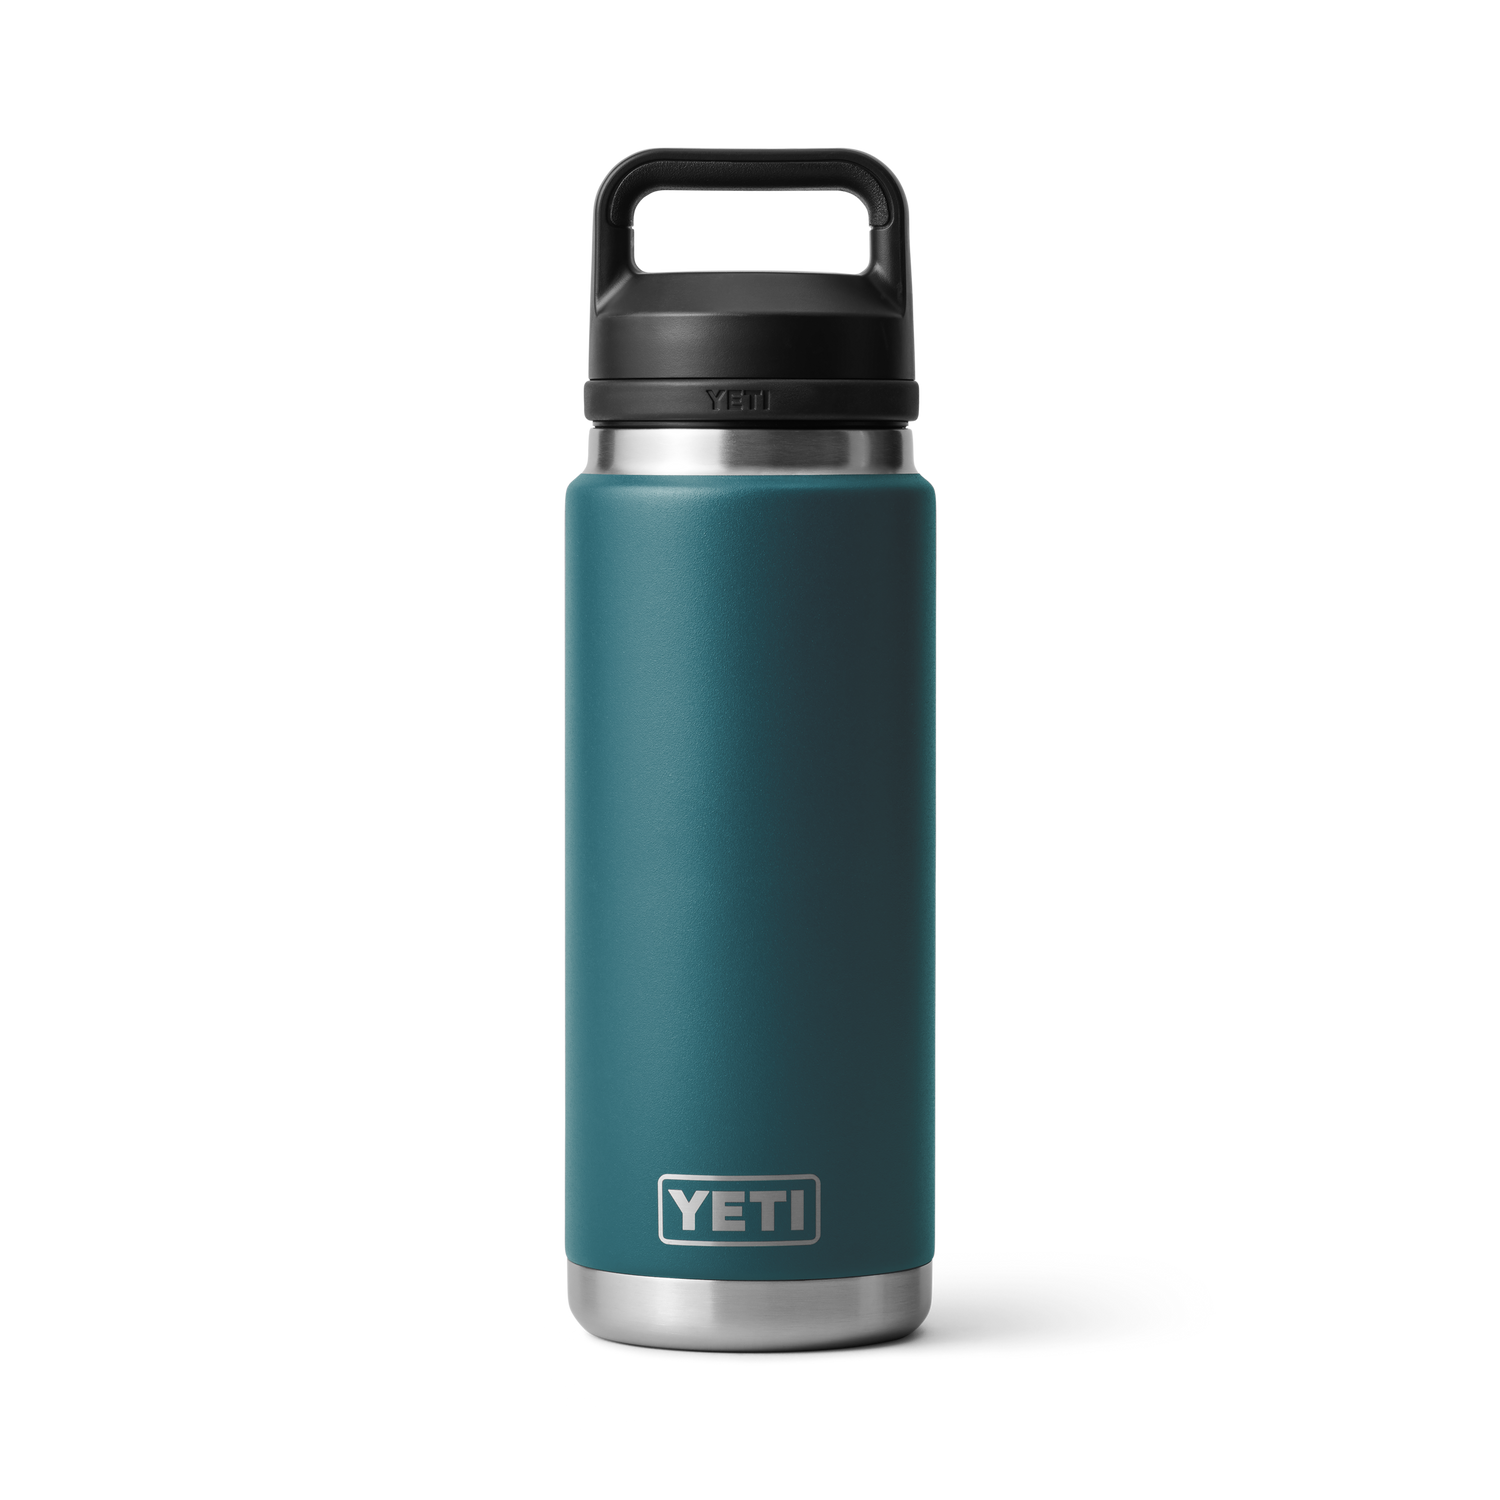 Big Water Bottles Are the New 'It' Accessory, so Here Are Our